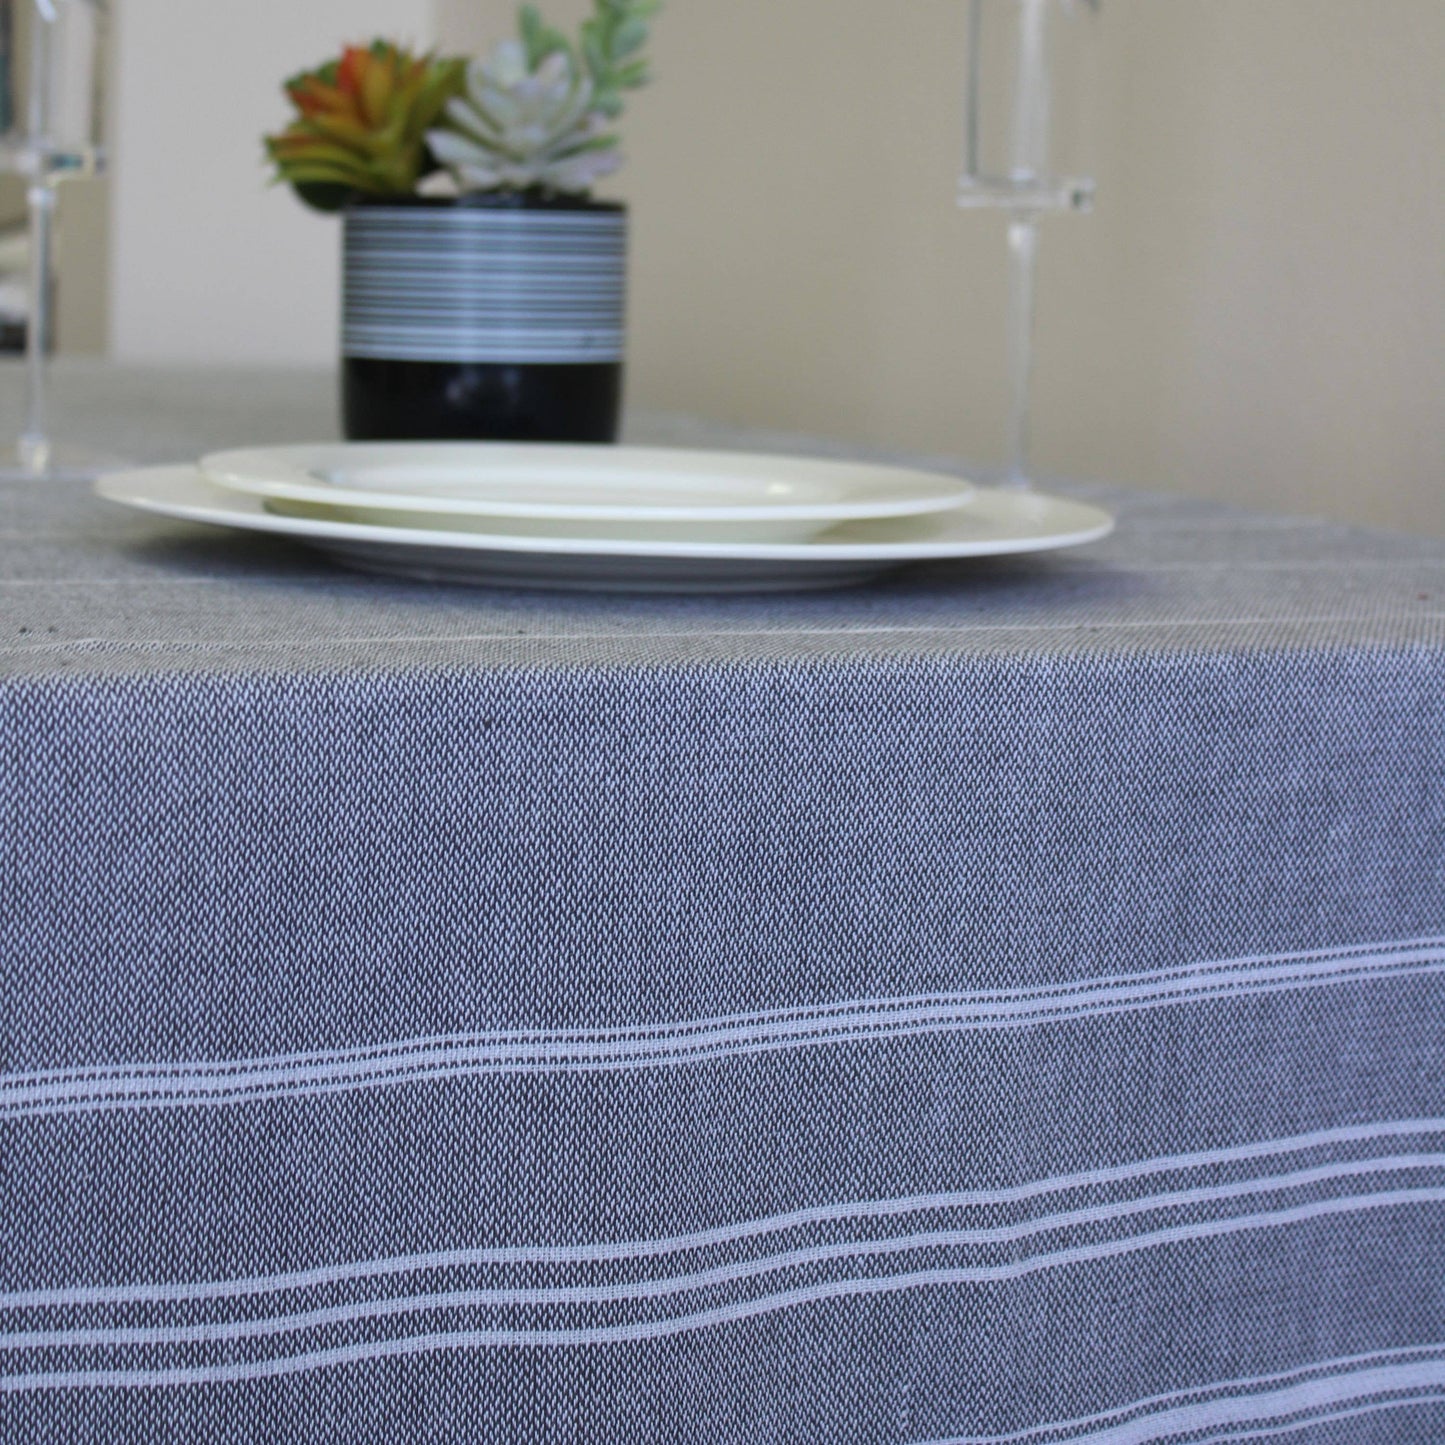 Fabstyles - Fabstyles Fouta Tablecloth